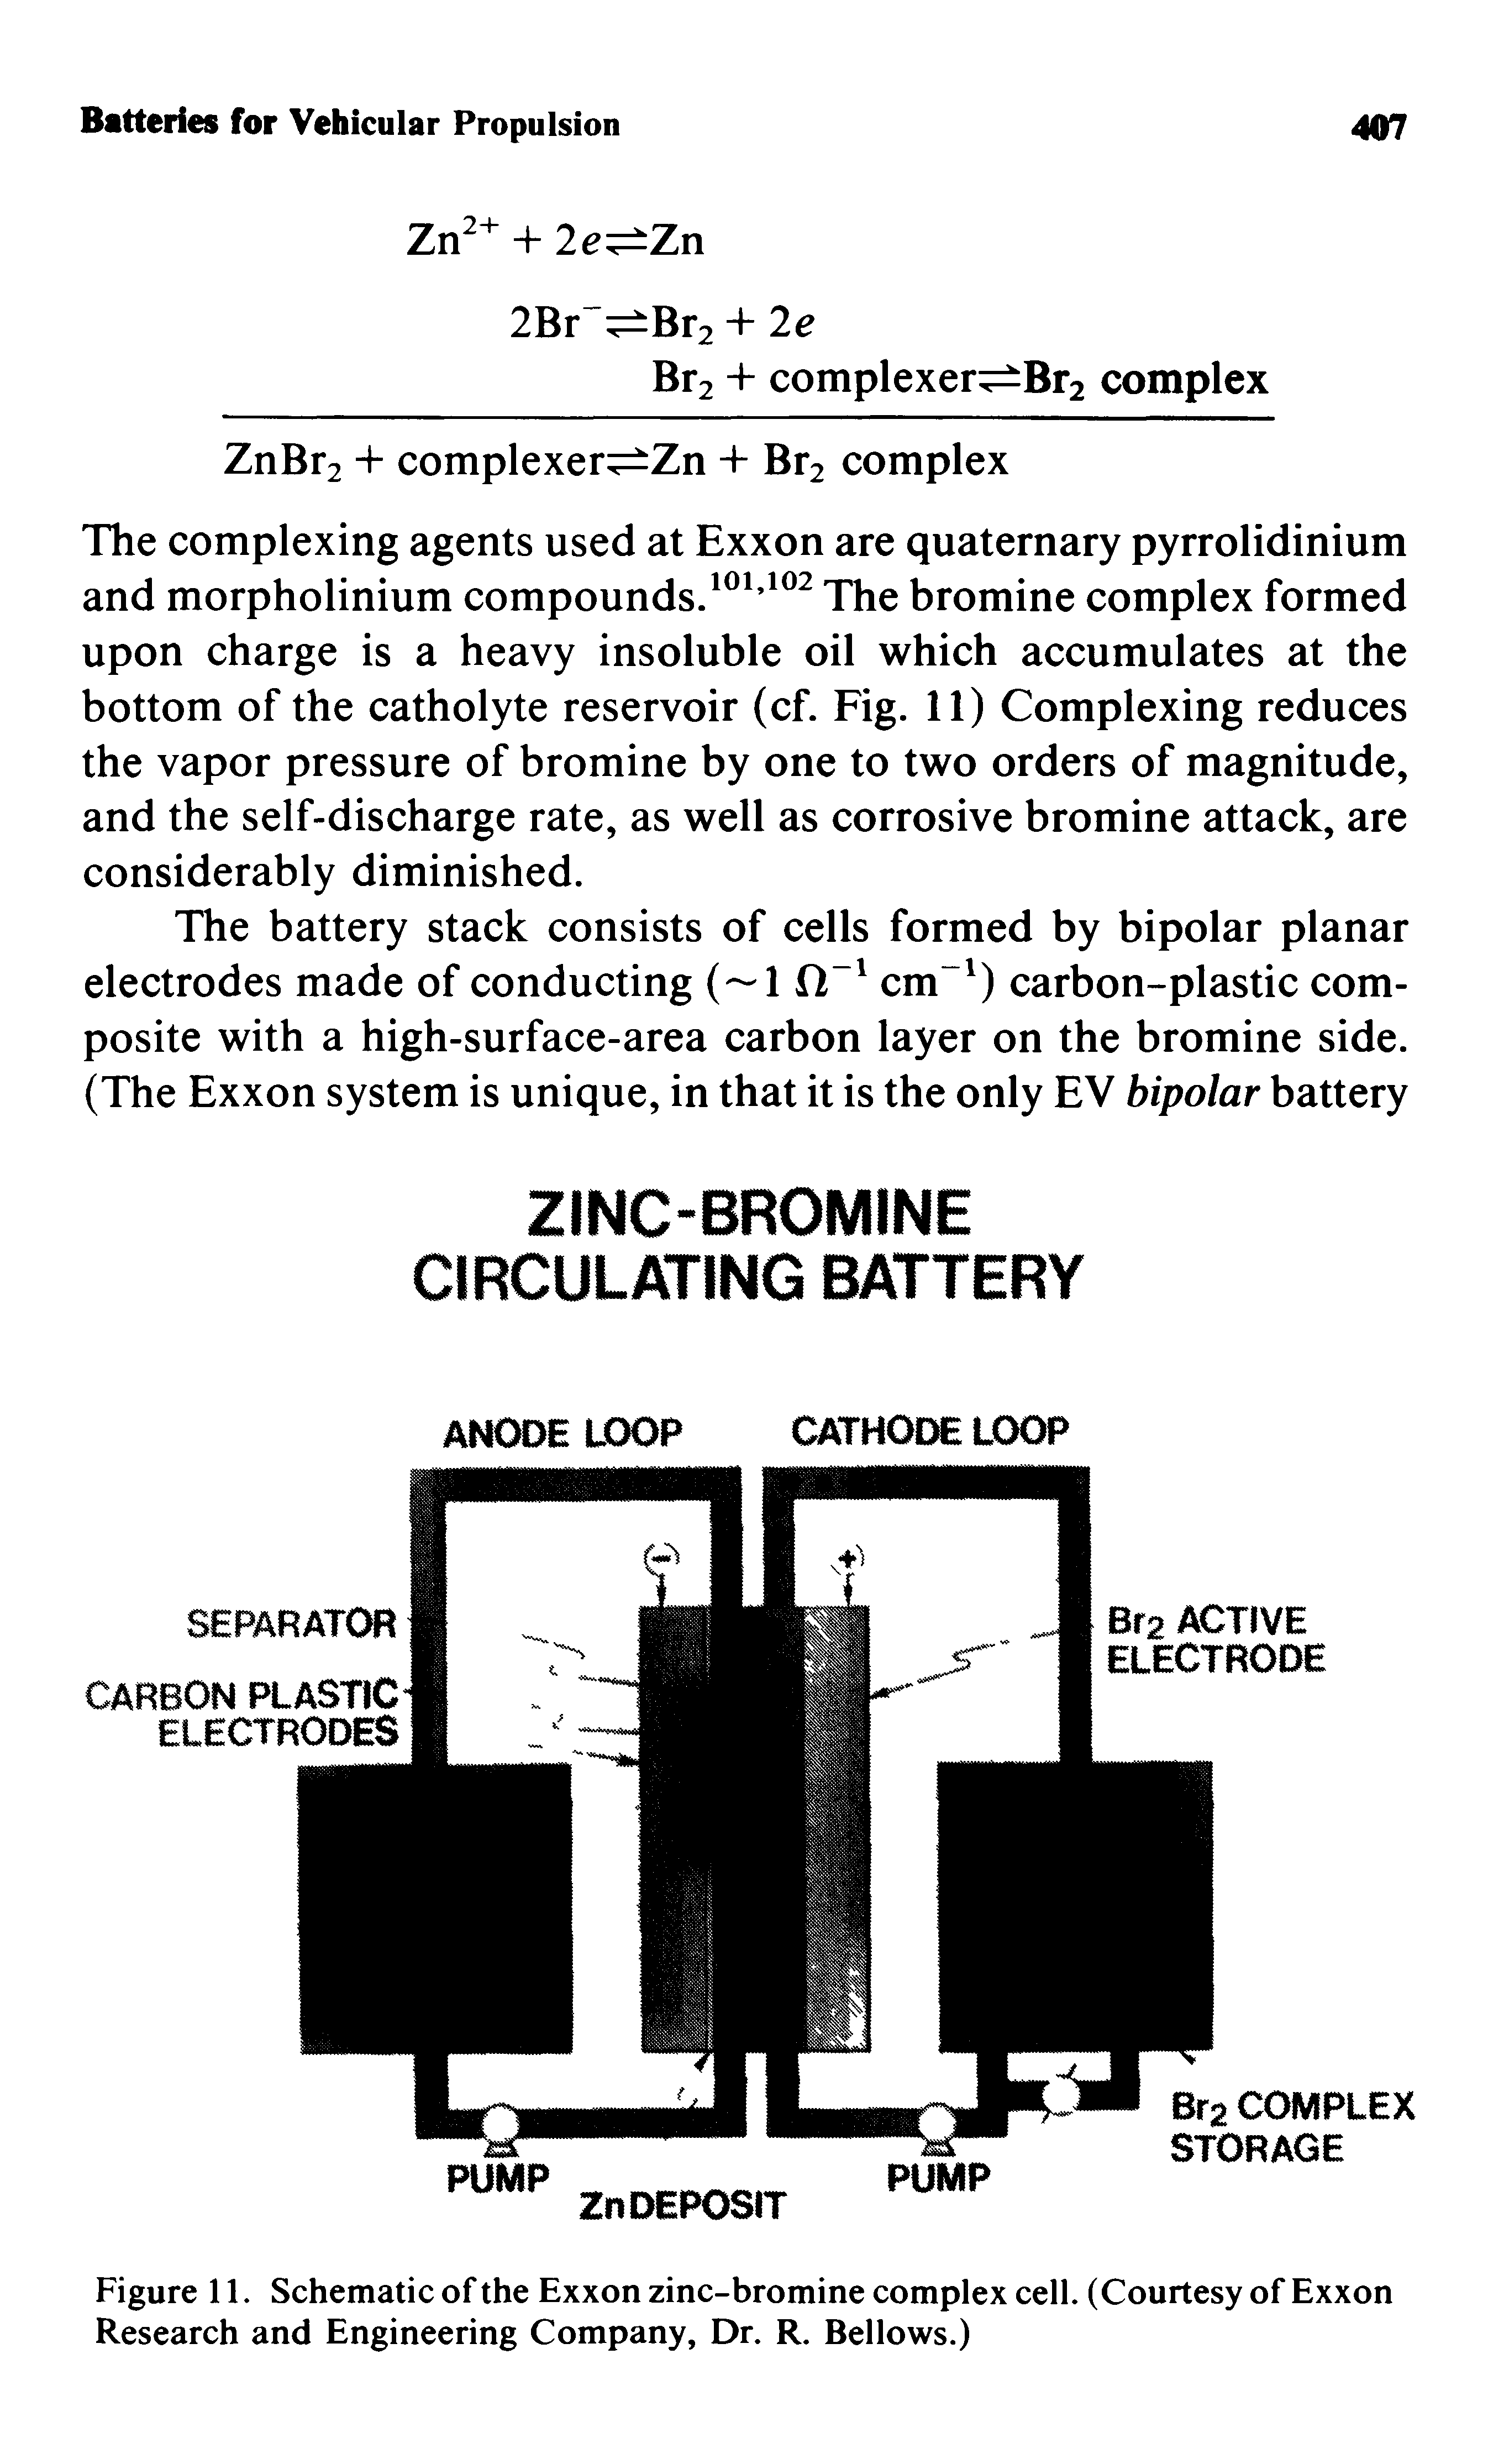 Figure 11. Schematic of the Exxon zinc-bromine complex cell. (Courtesy of Exxon Research and Engineering Company, Dr. R. Bellows.)...